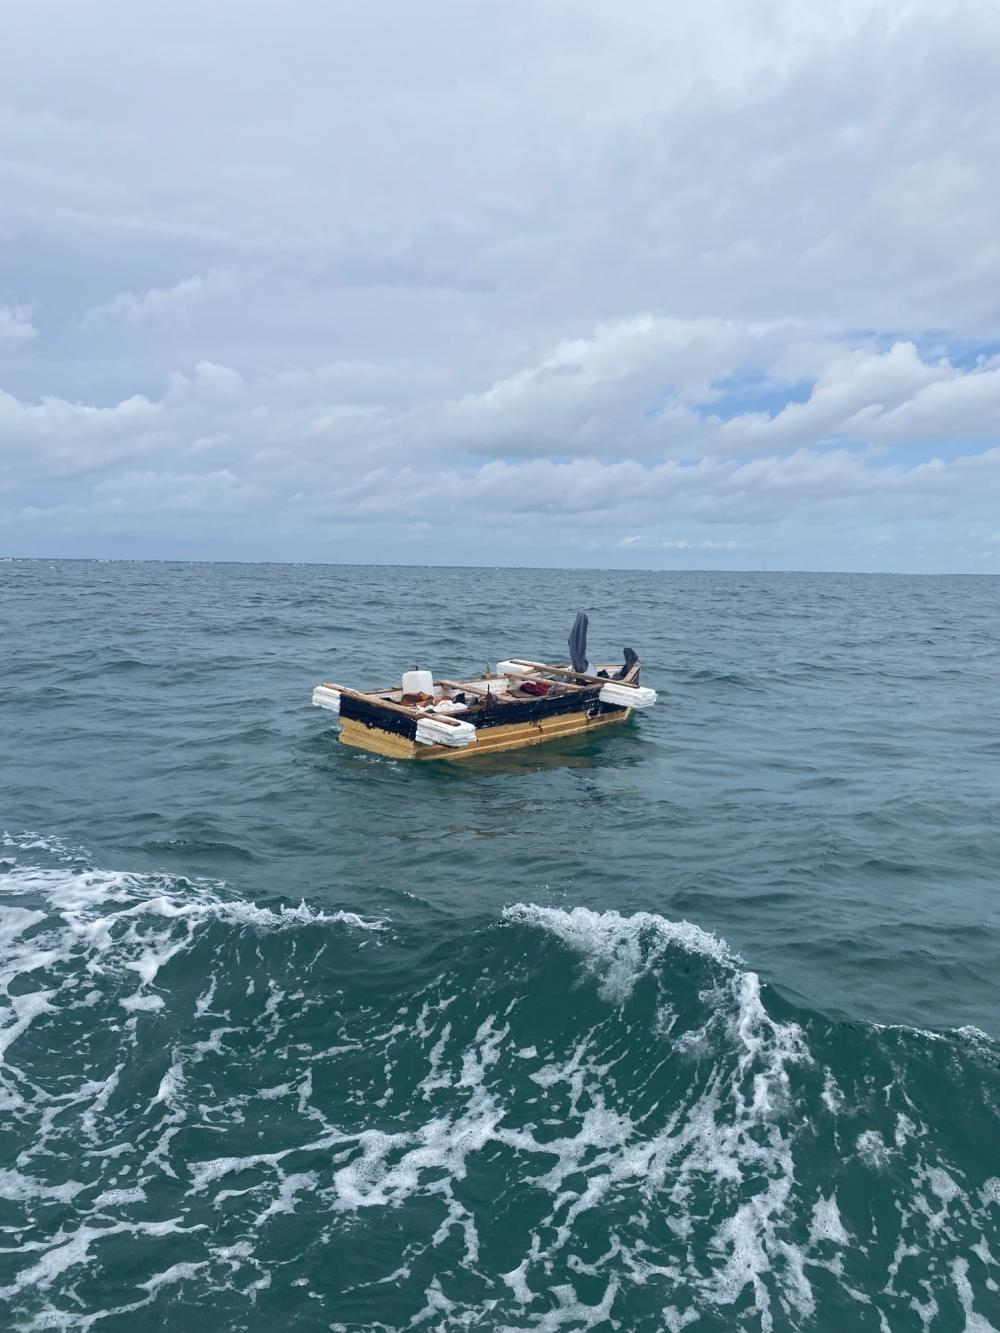 An interdicted migrant voyage approximately 15 miles south of Cudjoe Key, Florida, Oct 18, 2022. The people were repatriated to Cuba on Oct. 21, 2022. (U.S. Coast Guard photo)